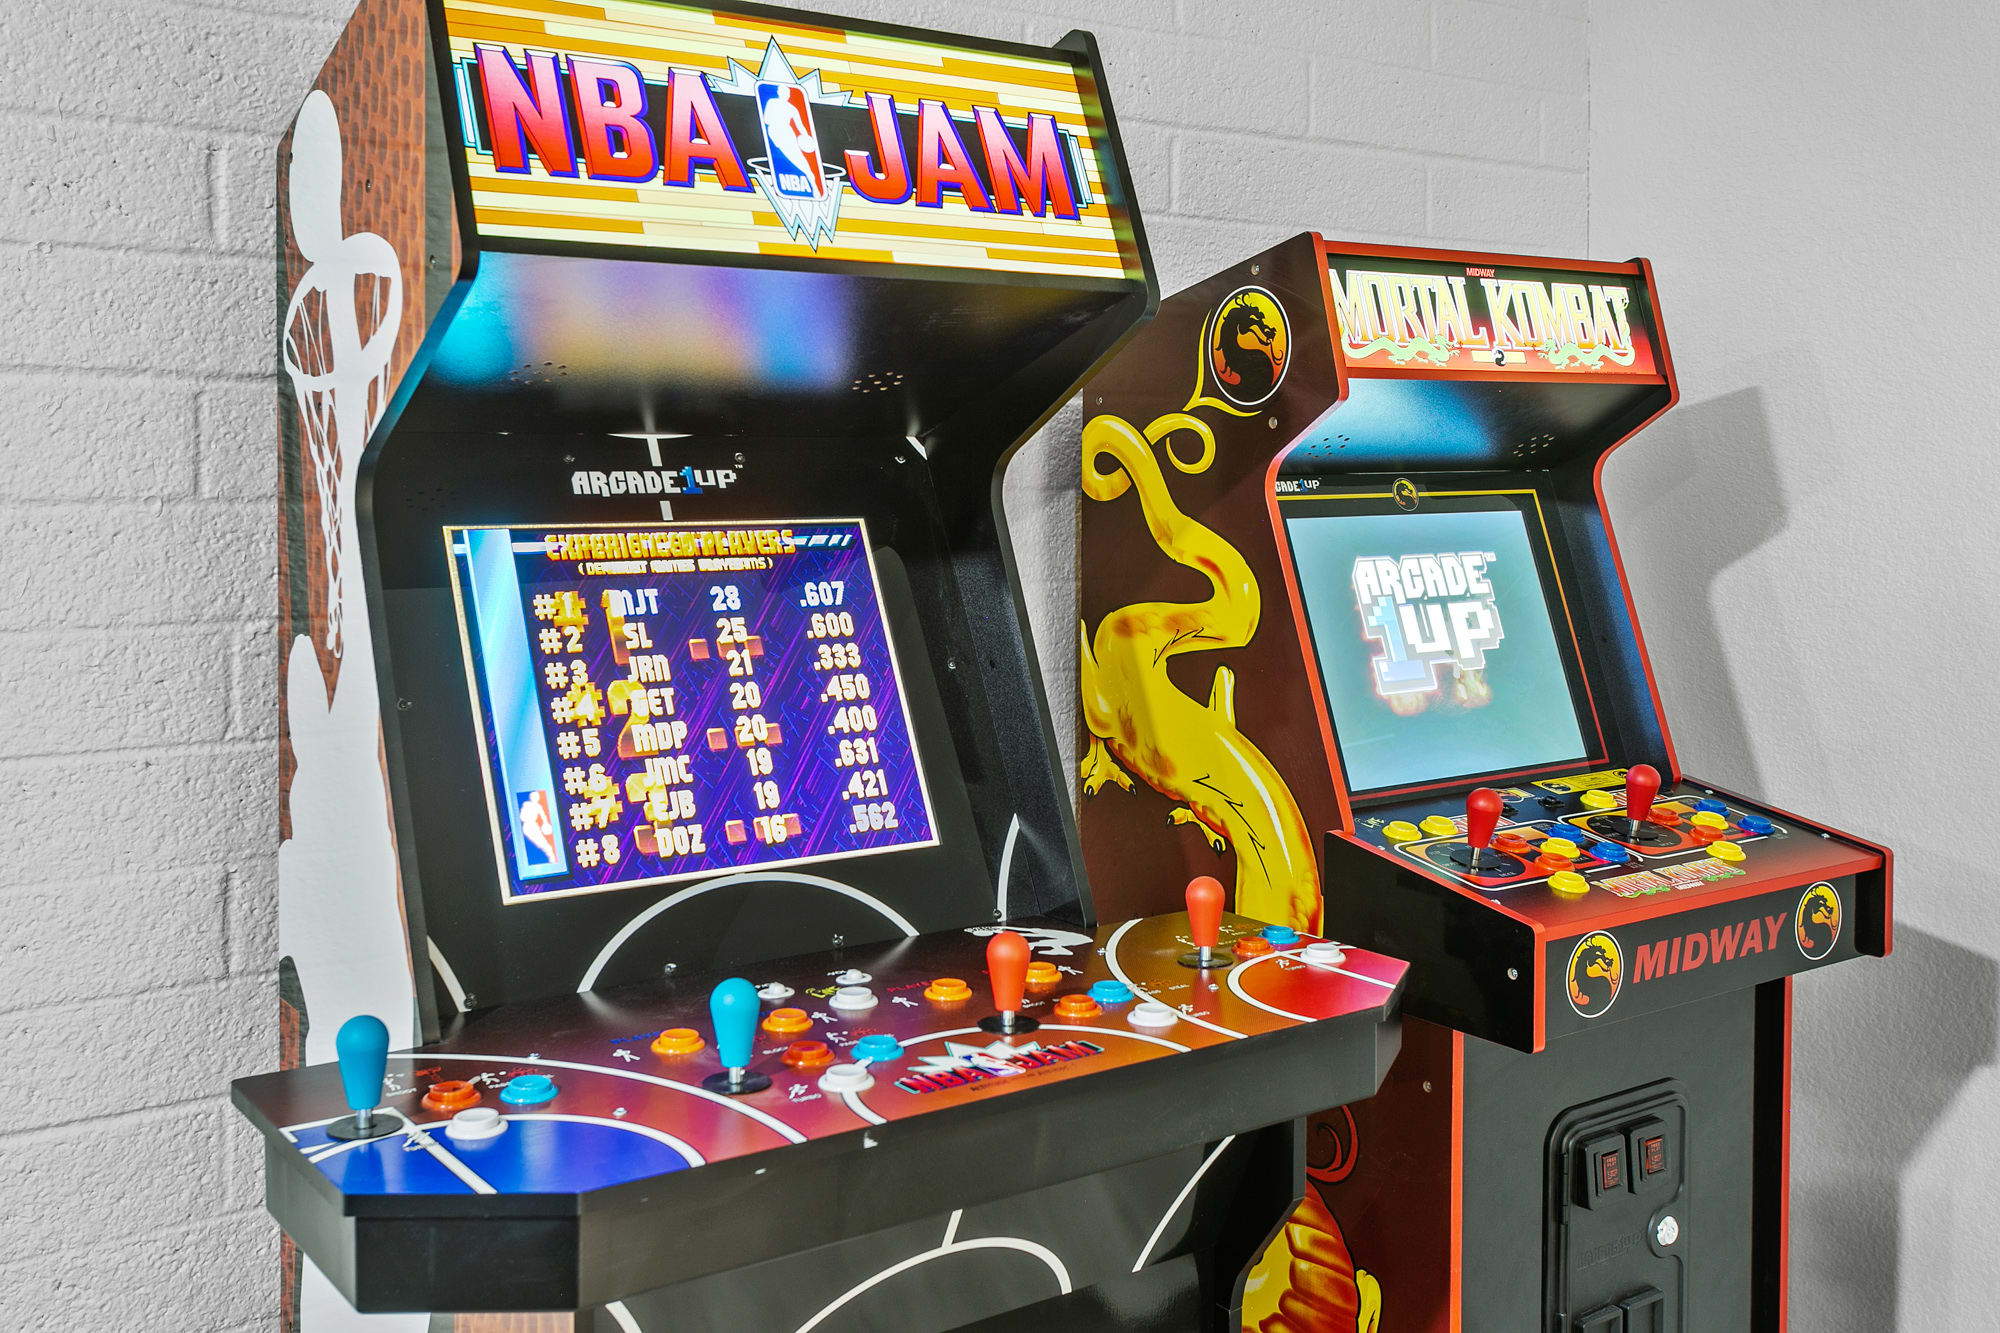 Did someone say arcade games? Play a game of NBA Jam or Mortal Combat